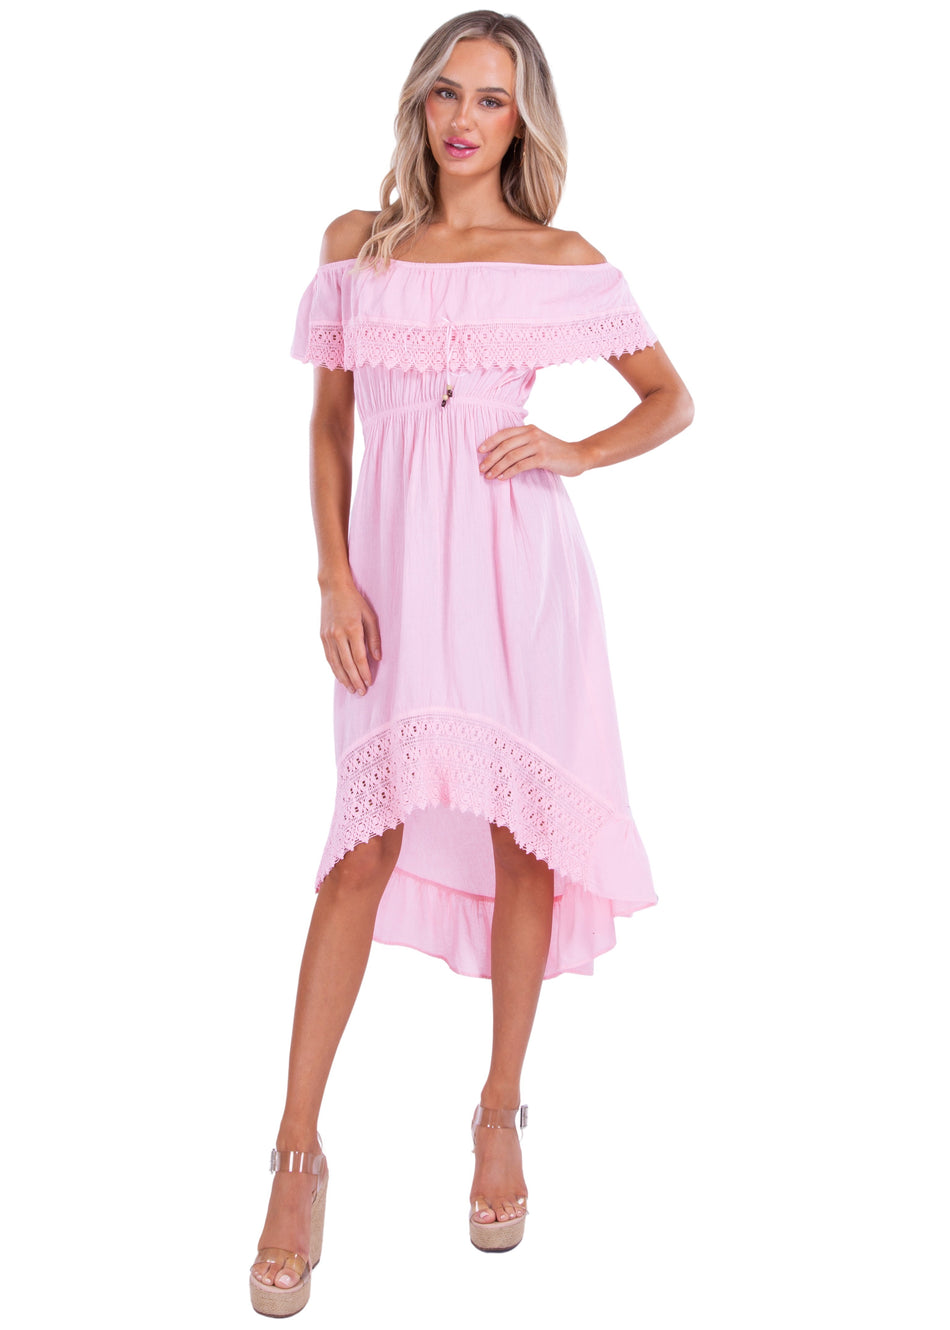 NW1083 - Baby Pink Cotton Dress